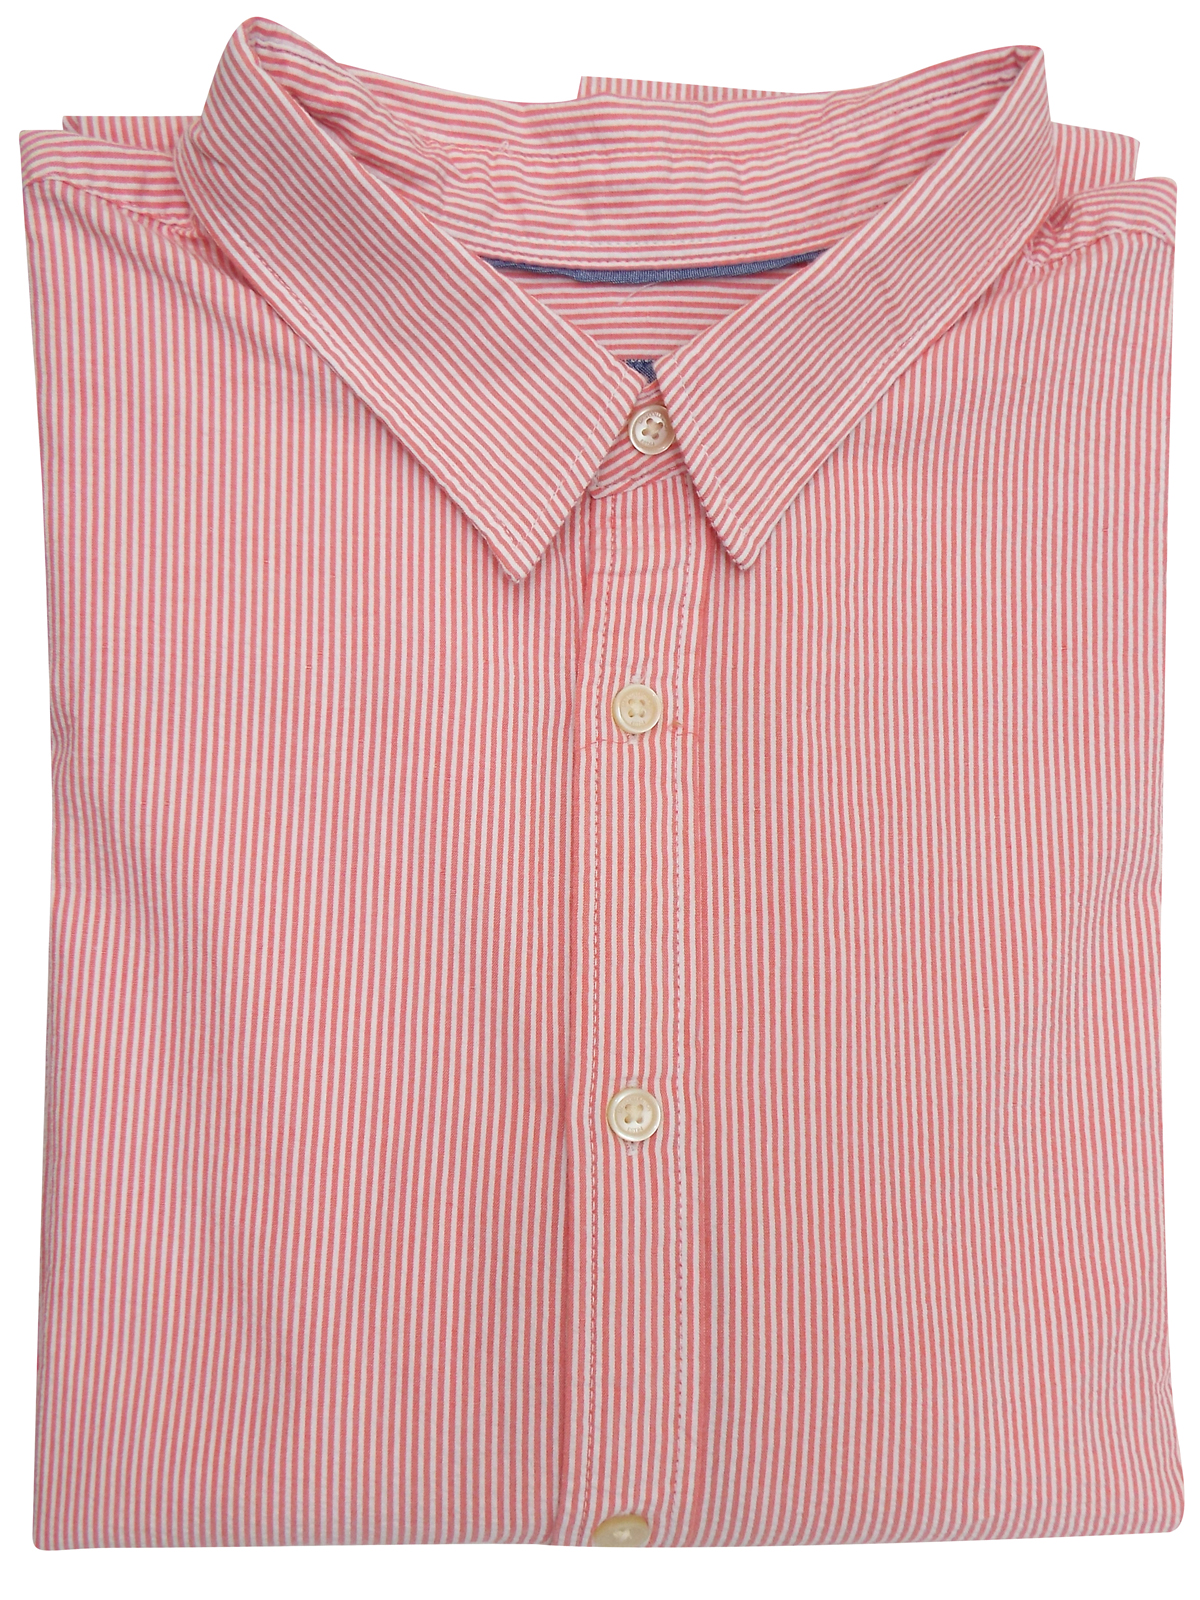 Marks and Spencer - - M&5 PINK Pure Cotton Thin Striped Shirt - Size ...